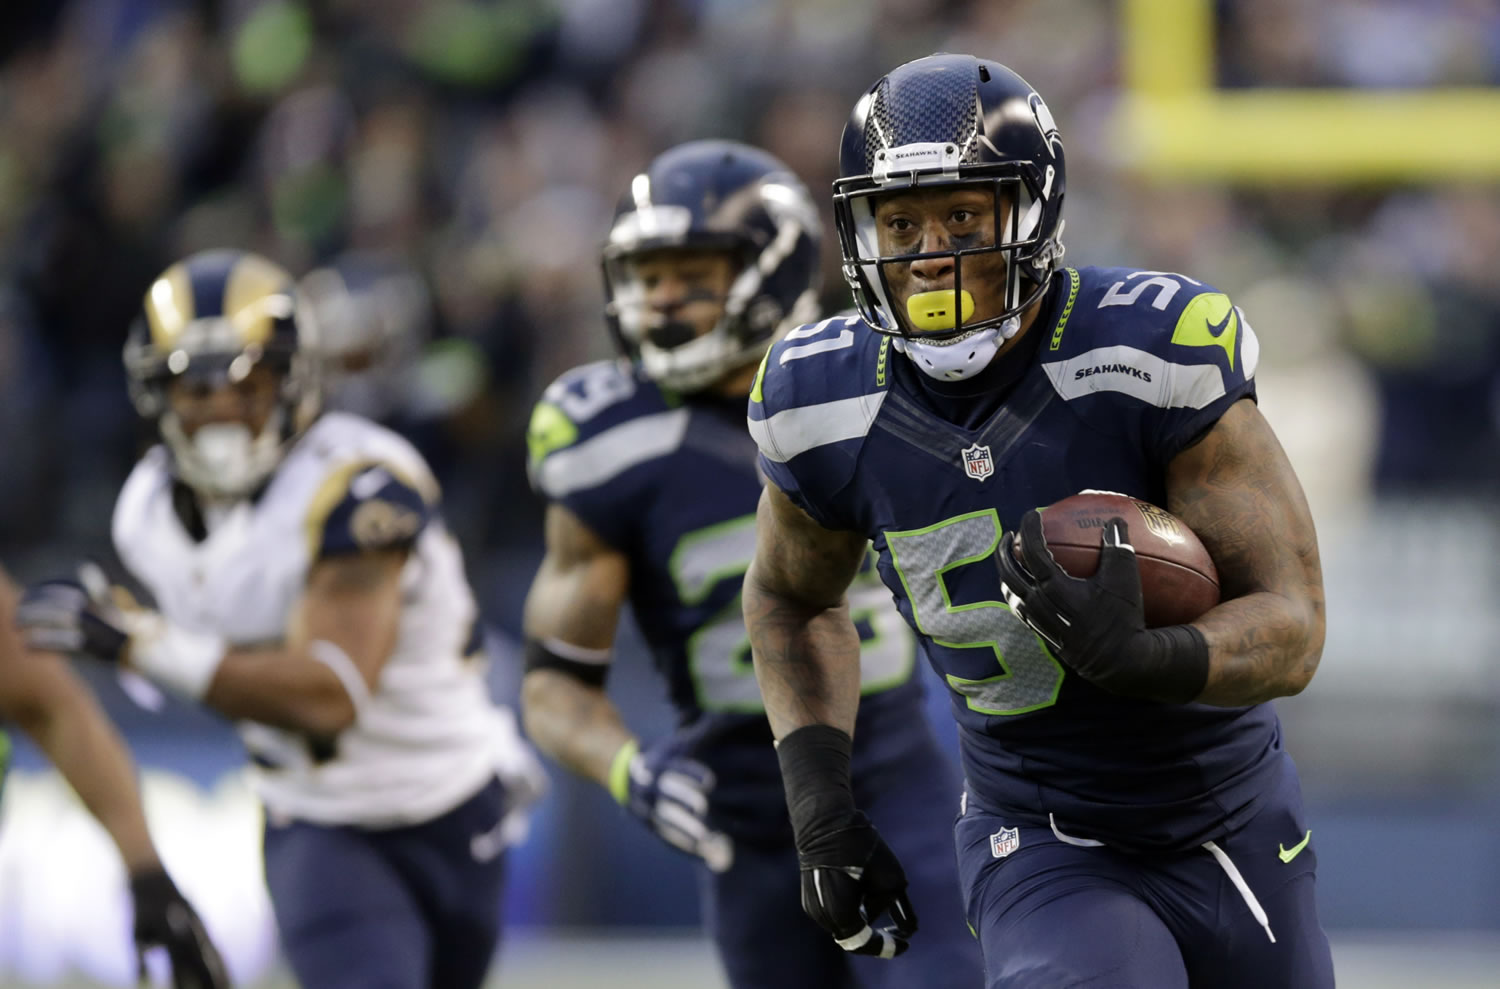 Seattle Seahawks linebacker Bruce Irvin, right, returns an interception for a touchdown against the St. Louis Rams in the fourth quarter Sunday, Dec. 28, 2014, in Seattle.